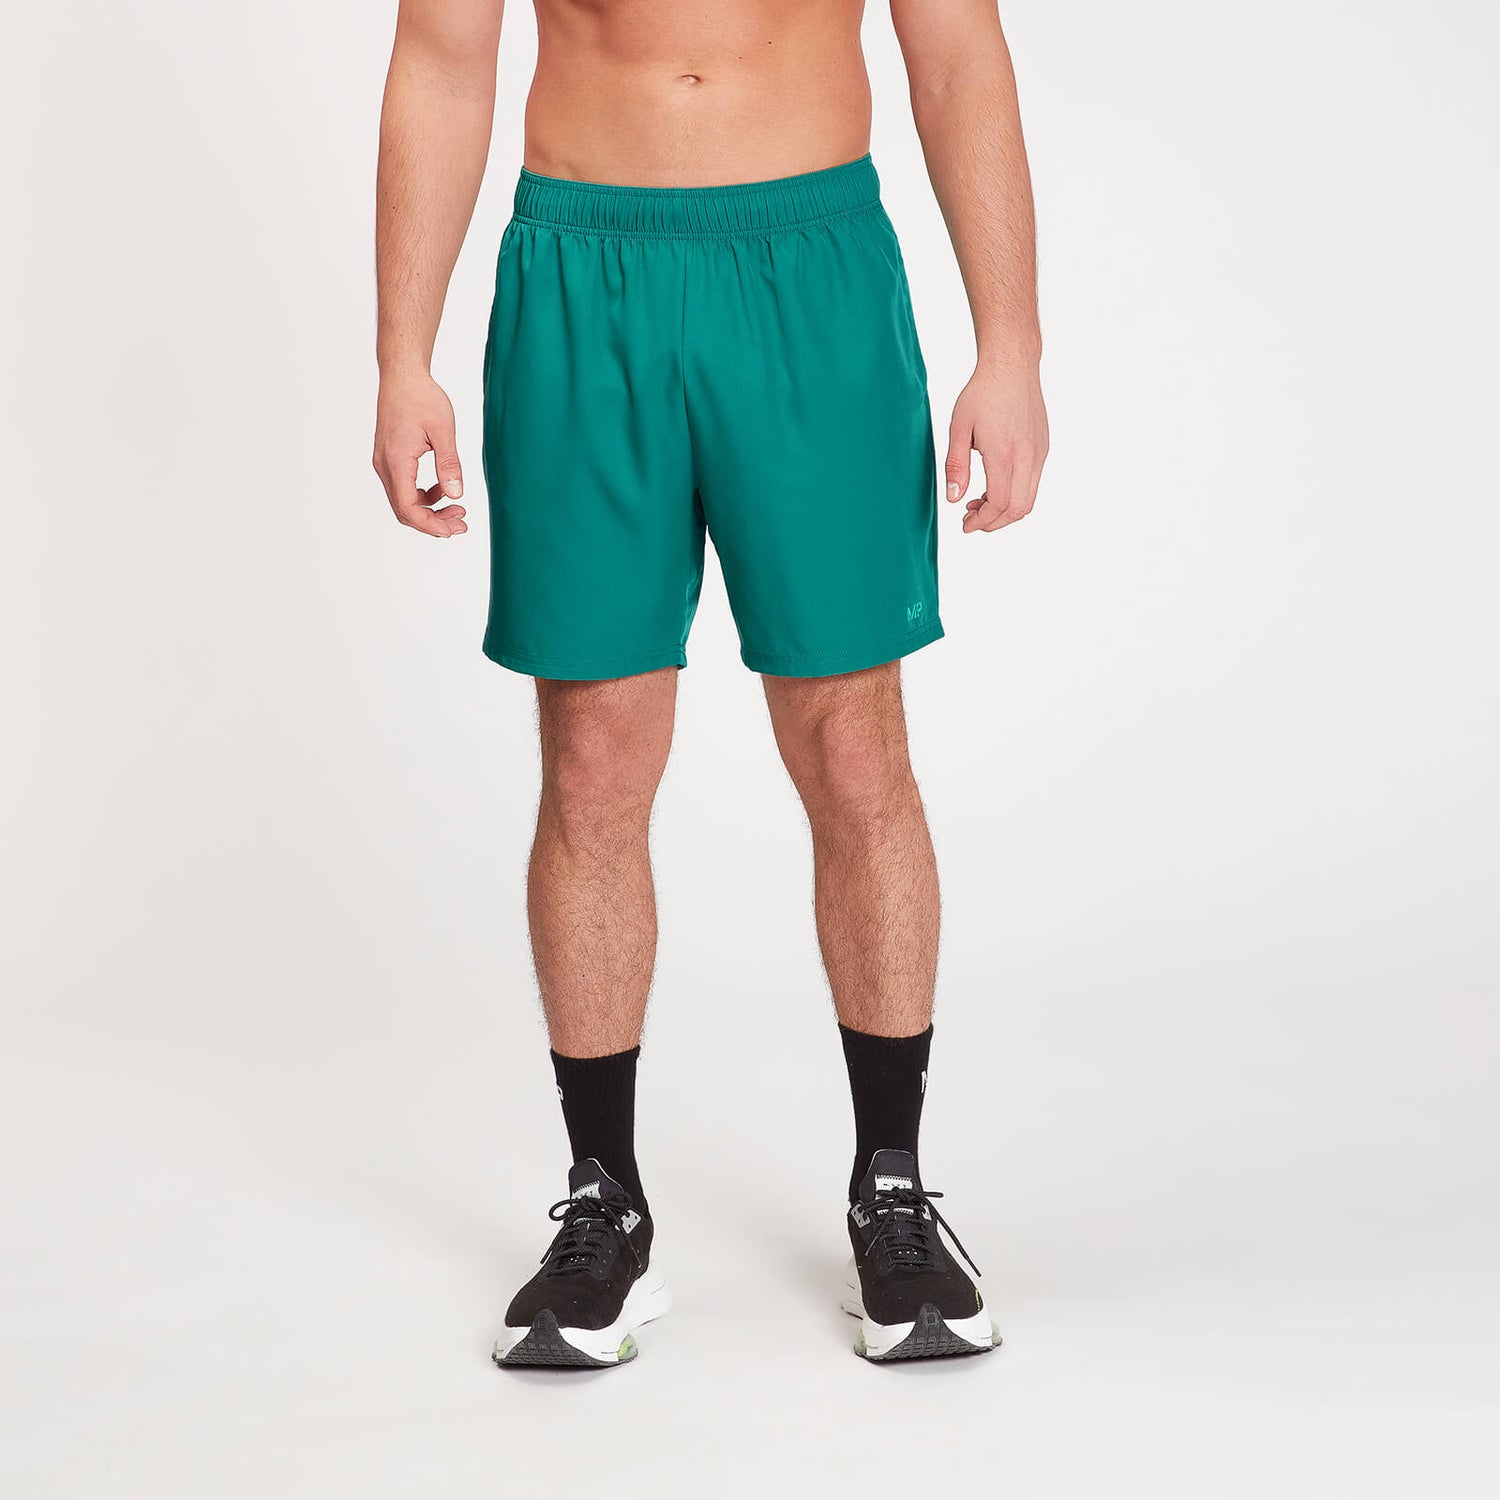 MP Fade Graphic Training Shorts til mænd - Energy Green - XS